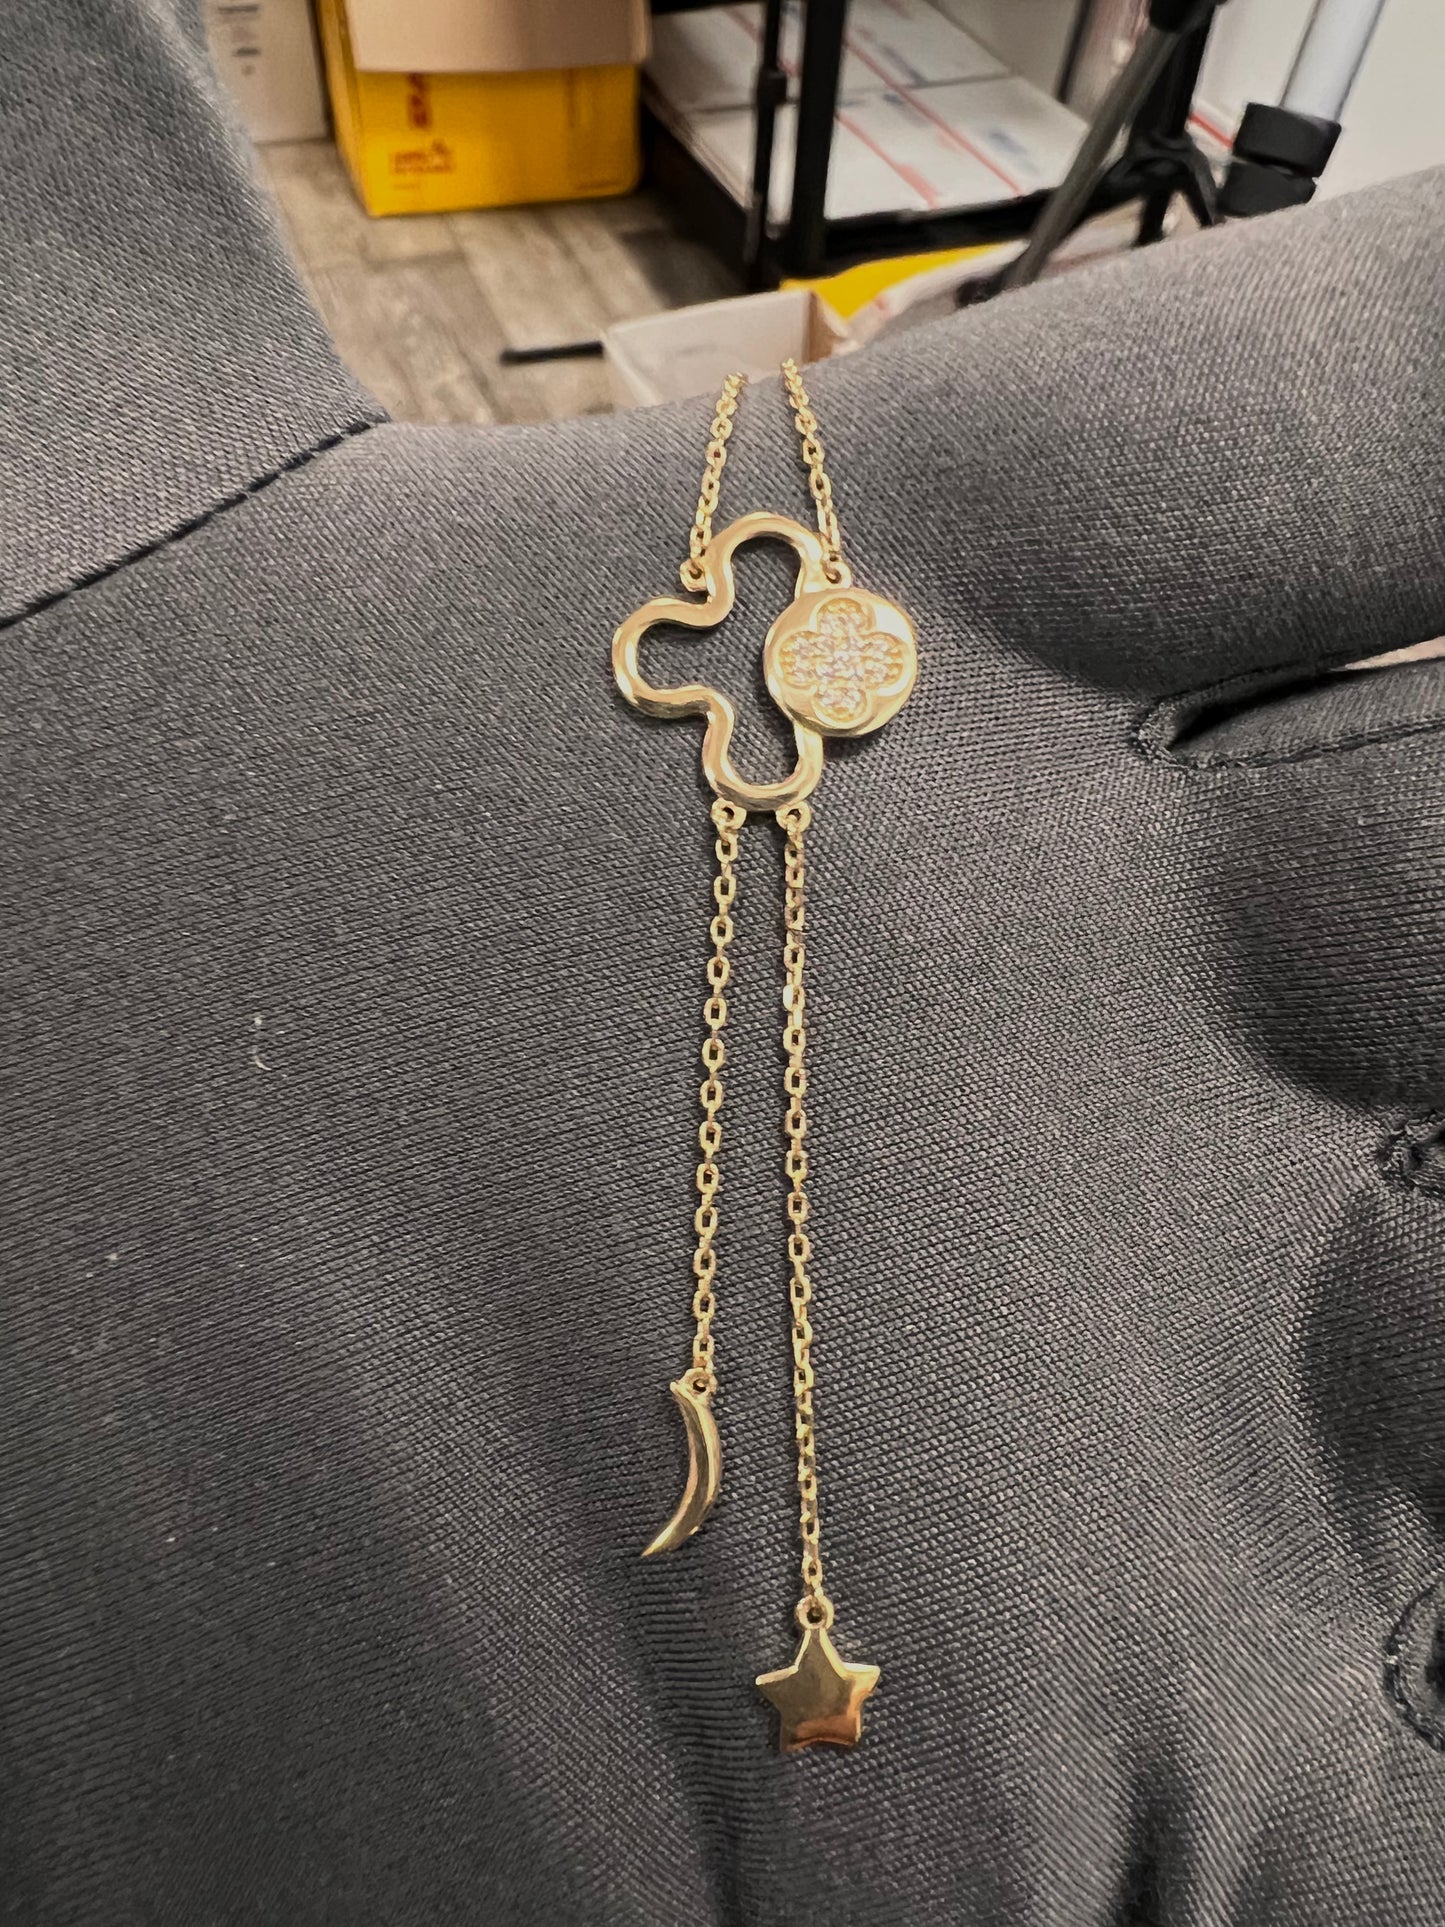 14K Yellow gold lucky clover necklace